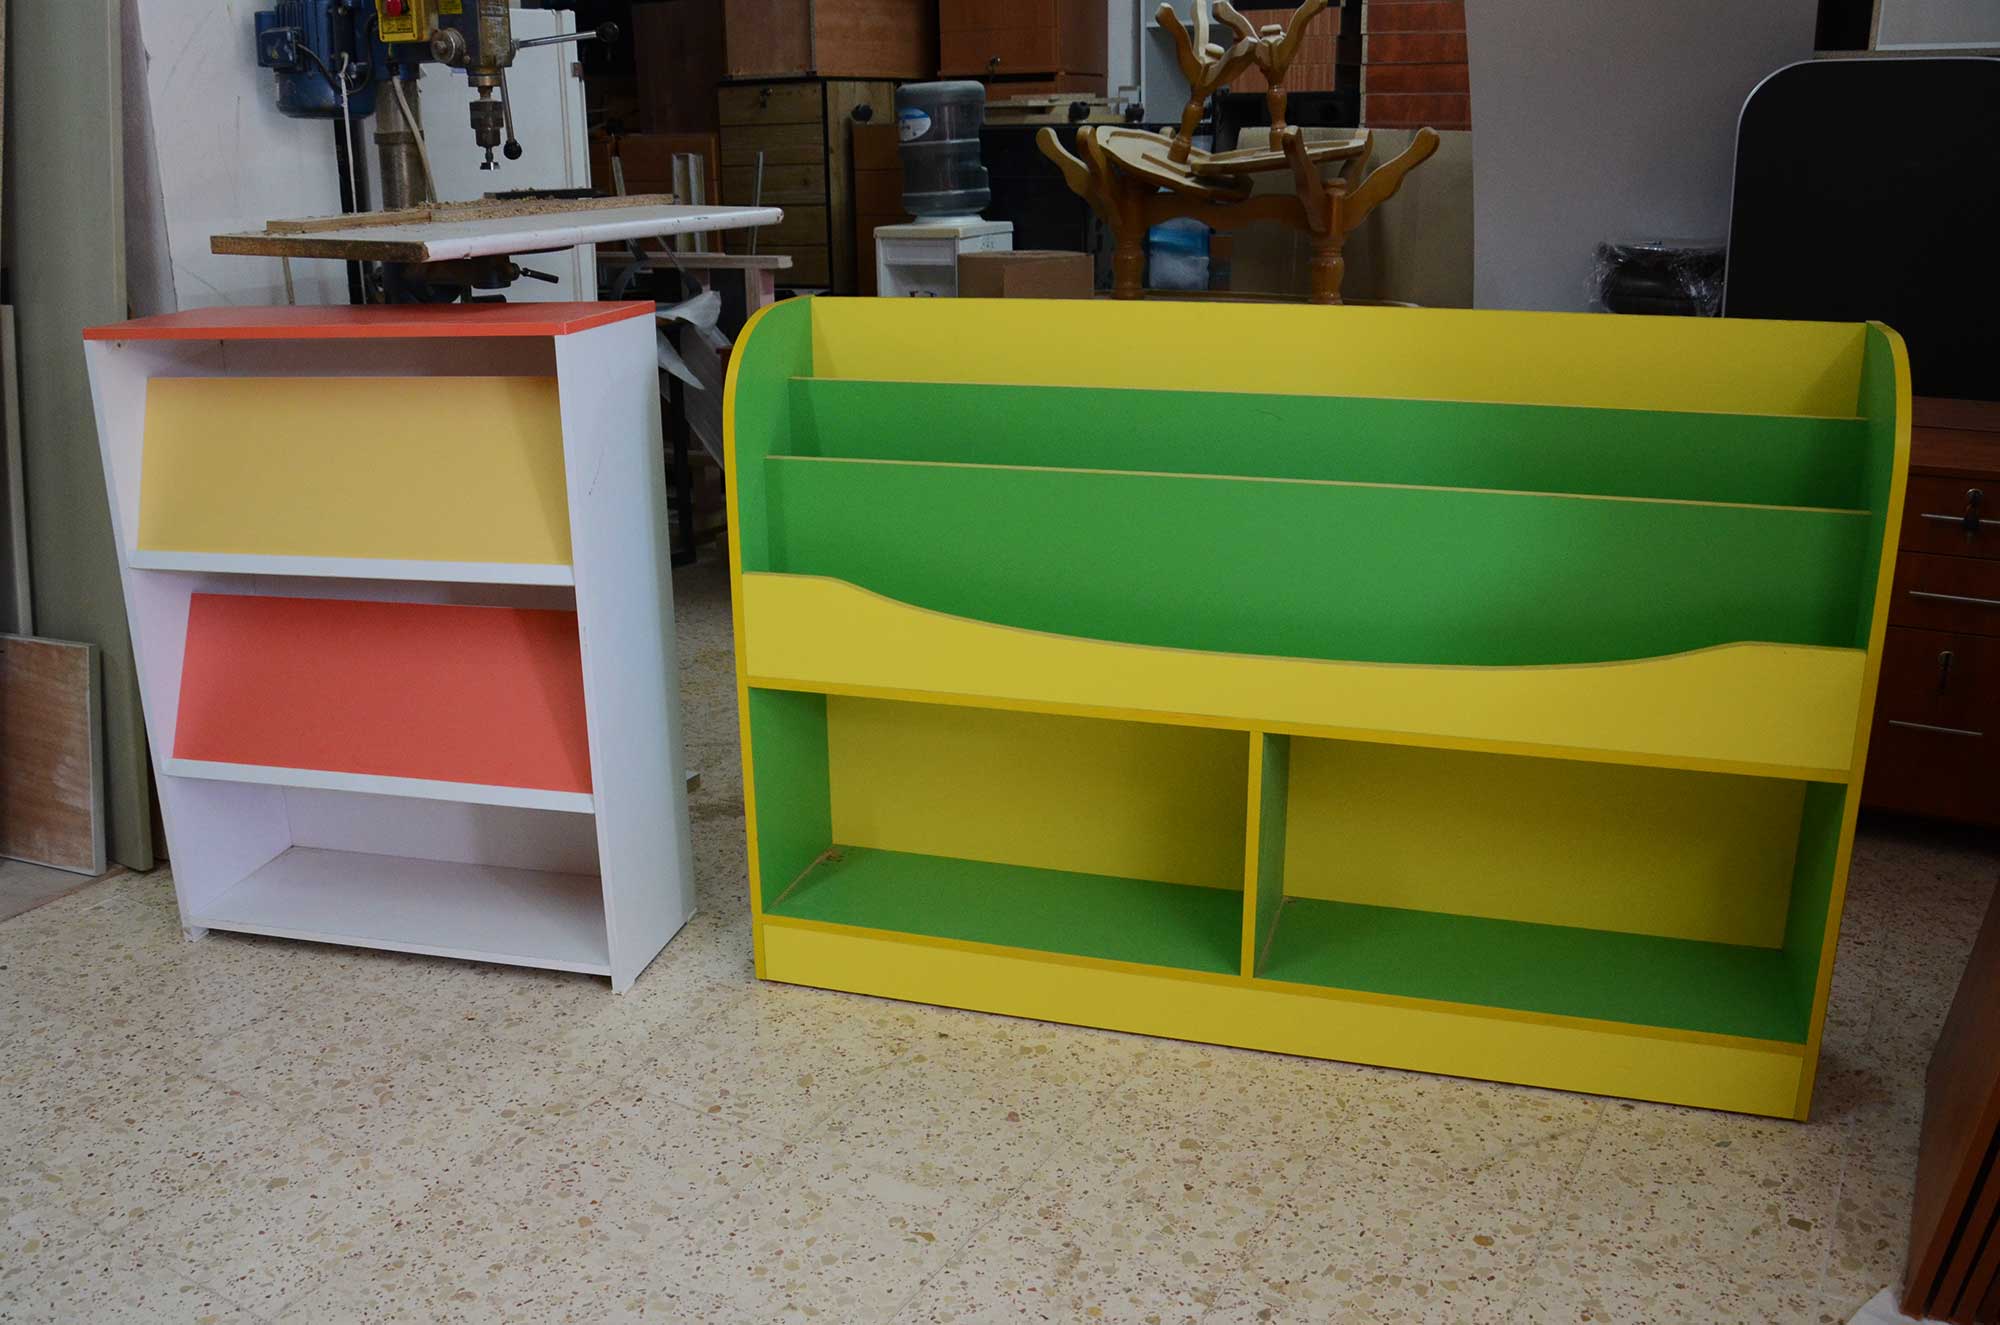 These colorful and height-appropriate shelving units were made by local carpenter, Fouad Nassar.